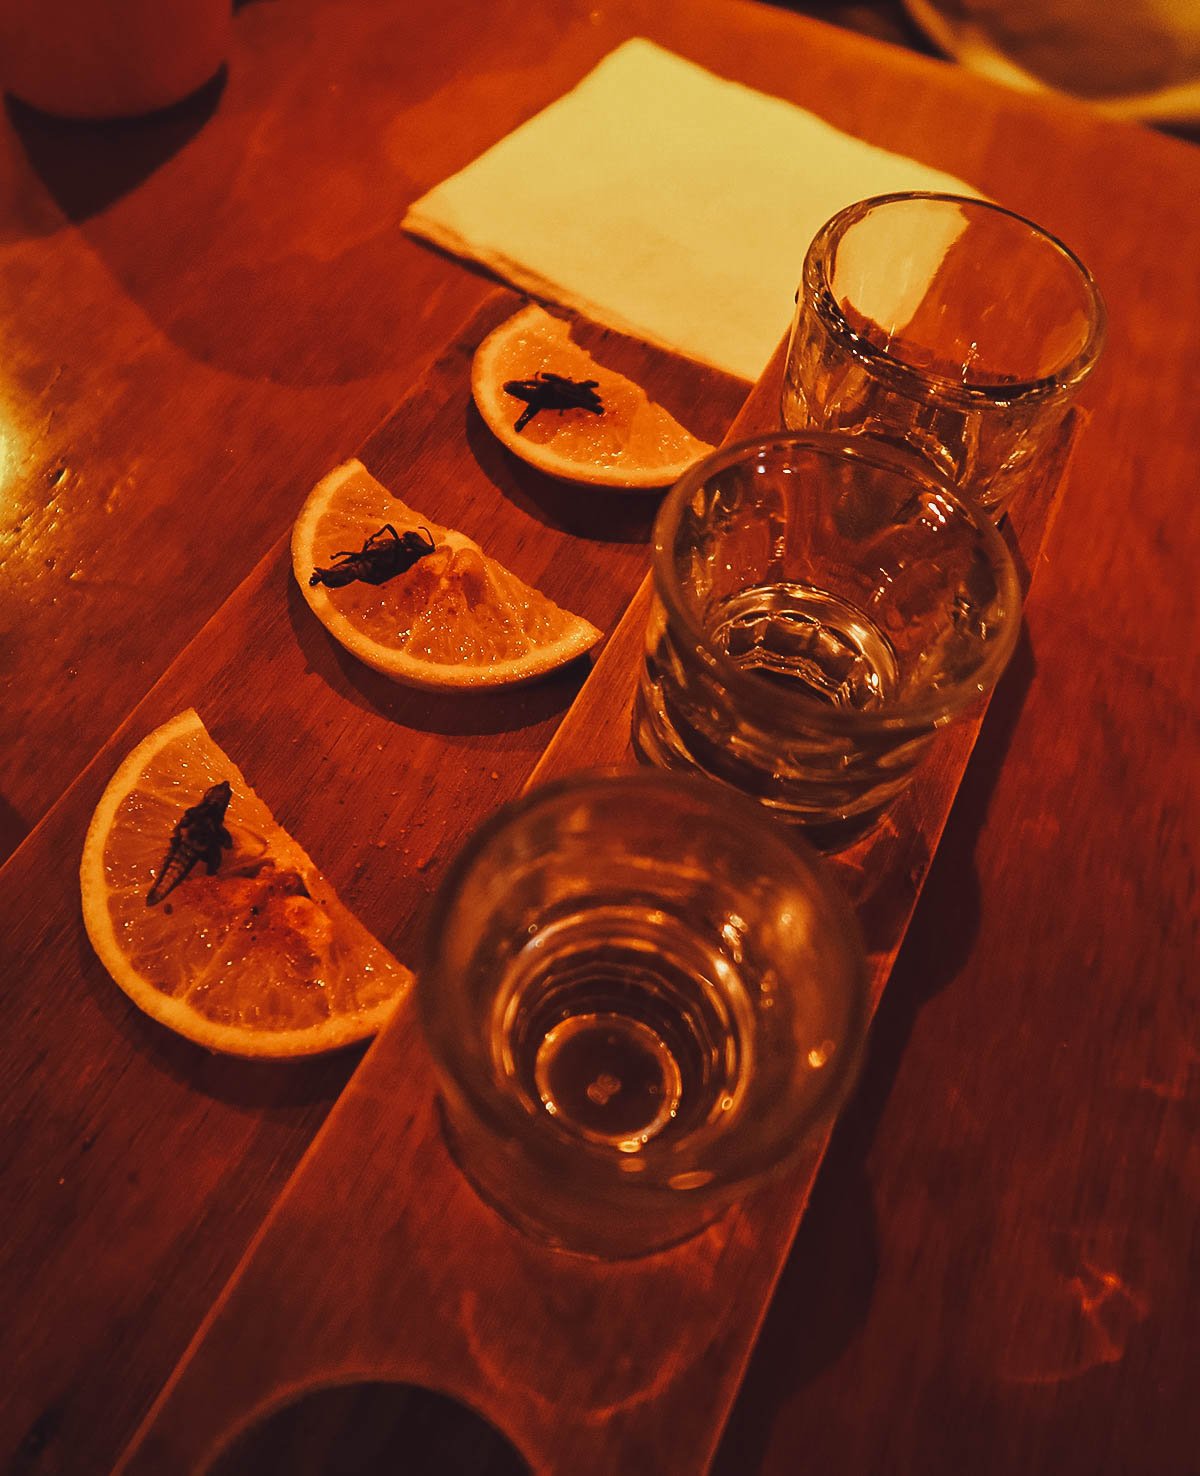 Mezcal with a slice of orange and a fried cricket